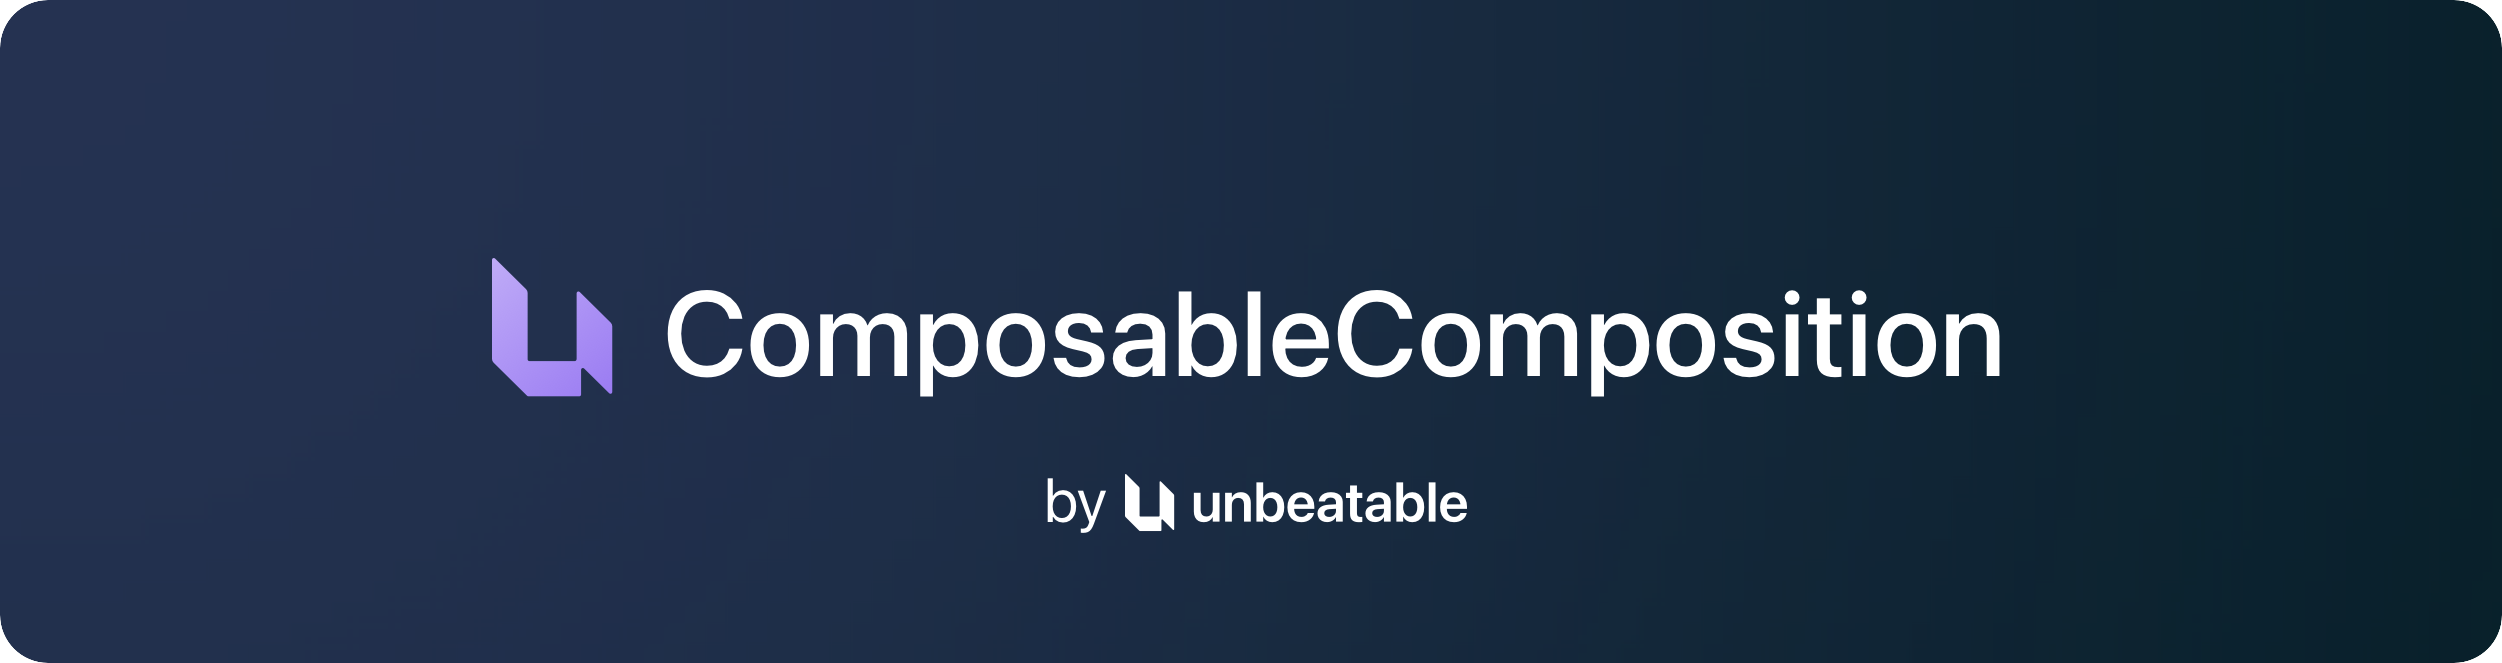 ComposableComposition Package Header